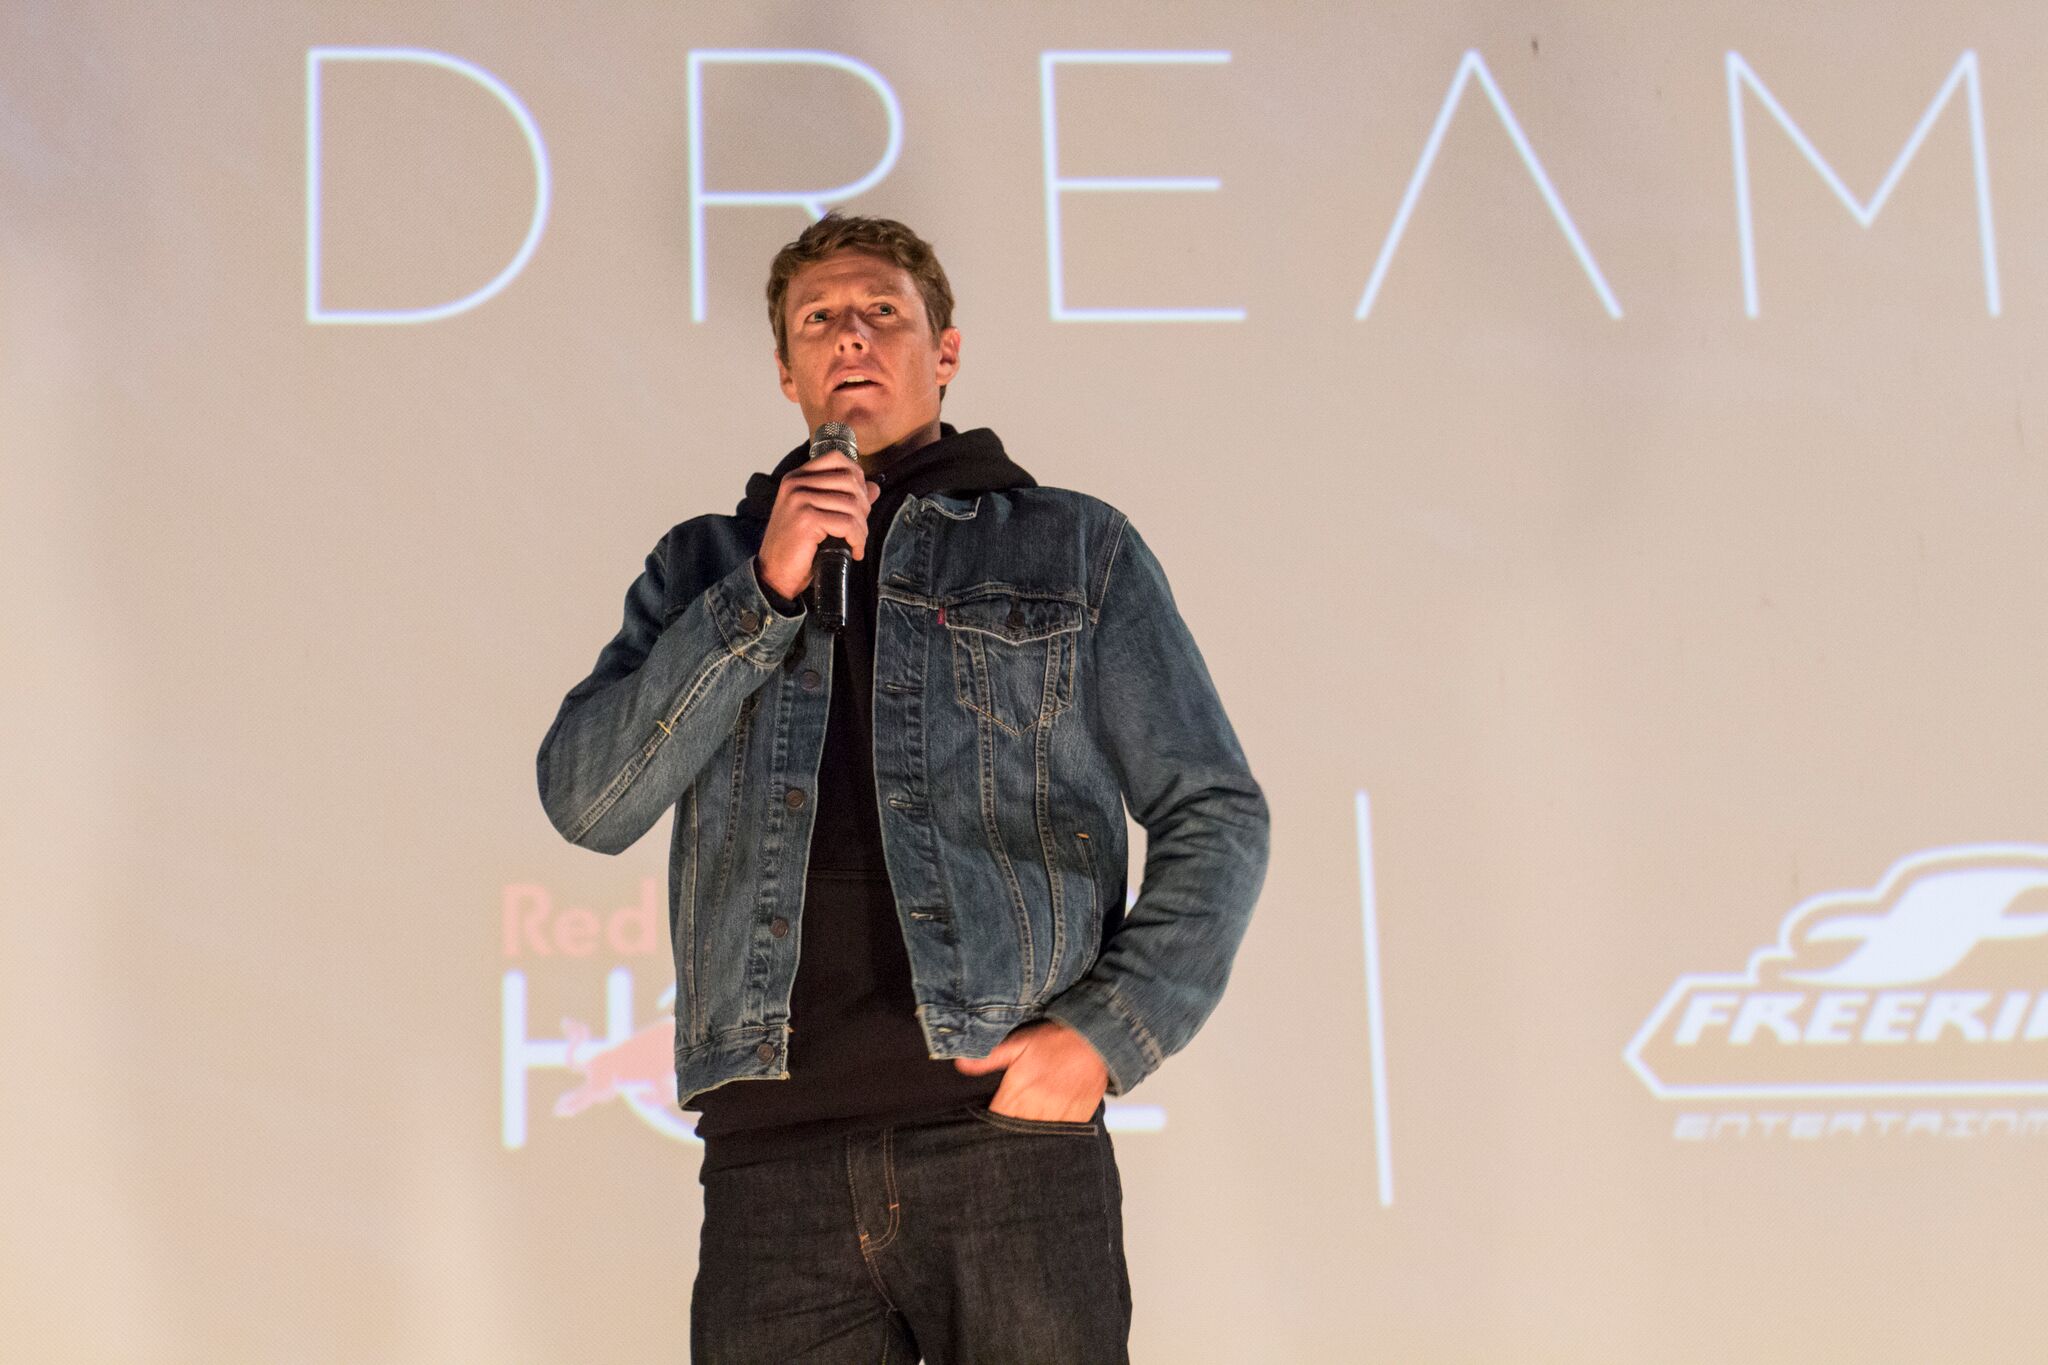 <em><strong>Written by Danielle Abbruzzi </strong></em>— On Saturday, February 18th, Red Bull Media House hosted an exclusive East Coast screening of <em>Distance Between Dreams</em> at Newport, Rhode Island’s, historic Jane Pickens Theater. This was a special night for the film’s star, Ian Walsh, who was born in Rhode Island but grew up in Maui. Ian’s parents Kitty and Peter moved their family to Maui from Newport more than 30 years ago and  stood beside him onstage as he spoke to a sold-out room of 472 guests.

[caption id="attachment_7659" align="alignnone" width="960"]<img class="size-large wp-image-7659" src="https://www.easternsurf.com/wp-content/uploads/2017/03/Jessica-Pohl-esm-1-1024x641.jpg" alt="" width="960" height="601" /> <em>The Jane Pickens Theatre with a glorious marquee. Photo: Jessica Pohl</em>[/caption]

Alongside Mom and Dad was Ian’s Godfather, Sid Abbruzzi, and director of the film, Rob Bruce. For Ian’s Newport family and friends, the film was much anticipated, and the fact that Ian flew all the way from Hawaii to Rhode Island in the middle of the busy winter wave season ensured the big turnout. Voted Best Documentary at the 2016 Surfer Poll Awards, <em>Distance Between Dreams</em> has been universally lauded as one of the best films in recent memory.

[caption id="attachment_7682" align="alignnone" width="960"]<img class="size-large wp-image-7682" src="https://www.easternsurf.com/wp-content/uploads/2017/03/Red-Bull-esm-red-bull-media-house-Kitty-Peter-walsh-sid-1-1024x683.jpg" alt="" width="960" height="640" /> <em>The Walsh family with director Robert Bruce, Original Water Brother Sid Abbruzzi, and friends. Photo: Jessica Pohl</em>[/caption]

Speaking to the audience, Ian paid homage to his East Coast roots. “This town means so much to me than I can’t put it into words. My first waves were ridden down at First Beach and Second Beach right in front of Sid’s old shop. My initial introduction to the ocean happened here. Every time I come here feels like I’m coming home. And that’s a gigantic testimony to you guys and this community and what you uphold.”

[caption id="attachment_7678" align="alignnone" width="960"]<img class="size-large wp-image-7678" src="https://www.easternsurf.com/wp-content/uploads/2017/03/Jessica-Pohl-esm-Ian-stage-1-1024x683.jpg" alt="" width="960" height="640" /> <em>Ian on stage before the premiere of “Distance Between Dreams.” Photo: Jessica Pohl</em>[/caption]

<em>Distance Between Dreams</em> documents a day in the life of Ian Walsh, but in addition to Jaws-dropping surfing, it’s also a heartfelt story of a family and their support for one another. Featured in the film are Walsh’s brothers DK, Shaun, and Luke Walsh, along with current WSL World Champion John John Florence and fellow chargers Greg Long and Shane Dorian. With a focus on paddle surfing into big waves versus the tow-in method, Ian and the boys show us the next-level preparation and protection that surfers undergo to get in the water and ride massive waves, let alone survive a wipeout and get back to safety.

[caption id="attachment_7688" align="alignnone" width="960"]<img class="size-large wp-image-7688" src="https://www.easternsurf.com/wp-content/uploads/2017/03/Red-Bull-Ian-Walsh-Performs-1-1024x683.jpg" alt="" width="960" height="640" /> <em>Ian tackling Jaws. Photo: Red Bull Media House</em>[/caption]

[caption id="attachment_7685" align="alignnone" width="960"]<img class="size-large wp-image-7685" src="https://www.easternsurf.com/wp-content/uploads/2017/03/Red-Bull-Ian-Luke-Walsh-1-1024x683.jpg" alt="" width="960" height="640" /> <em>Ian with his brother Luke Walsh. Photo: Red Bull Media House</em>[/caption]

Director Rob Bruce said during an interview, “99.9% of surfers do not understand what goes into big-wave riding. There is so much work, training, and commitment.” Bruce, who lives in LA, is also an original East Coaster — he surfed his first waves in Westerly, RI. A former downhill ski racer, Rob left the sport to enter film school. He admired big personalities and 2002 first met Ian and his family in Maui. “I wanted to show people what they do, who they are, and what their world is,” Bruce said. “Ian is well-spoken, and all four Walsh boys are each their own individual. But like brothers going to battle, they keep an eye on each other to be sure they are all as safe as possible.” Bruce referred to Ian and his brothers’ bond and the sacrifice of their parents as the “backbone story” of the film.

[caption id="attachment_7664" align="alignnone" width="960"]<img class="size-large wp-image-7664" src="https://www.easternsurf.com/wp-content/uploads/2017/03/Jessica-Pohl-esm-DBD-Director-Rob-Bruce-1024x683.jpg" alt="" width="960" height="640" /> <em>Film director Rob Bruce, who himself caught his first wave in Westerly. “Distance Between Dreams'” Rhode Island roots run deep. Photo: Jessica Pohl</em>[/caption]

[caption id="attachment_7684" align="alignnone" width="960"]<img class="size-large wp-image-7684" src="https://www.easternsurf.com/wp-content/uploads/2017/03/Red-Bull-Ian-DK-Walsh_Jaws-1-1024x683.jpg" alt="" width="960" height="640" /> <em>Ian with his brother DK Walsh at Jaws. Photo: Red Bull Media House</em>[/caption]

[caption id="attachment_7688" align="alignnone" width="960"]<img class="size-large wp-image-7688" src="https://www.easternsurf.com/wp-content/uploads/2017/03/Red-Bull-Ian-Walsh-Performs-1-1024x683.jpg" alt="" width="960" height="640" /> <em>Ian tackling Jaws. Photo: Red Bull Media House</em>[/caption]

Everyone in Rhode Island sends big thanks to Ian and Red Bull Media House for giving us Nor’easters 60 minutes of El Niño swells and Hawaiian sun in the middle of February! <em>Distance Between Dreams</em> is available on iTunes; visit <a href="http://www.distancebetweendreams.com">www.distancebetweendreams.com</a> for info on upcoming premieres.

[caption id="attachment_7662" align="alignnone" width="960"]<img class="size-large wp-image-7662" src="https://www.easternsurf.com/wp-content/uploads/2017/03/Jessica-Pohl-esm-4-Ashley-Jon-1024x683.jpg" alt="" width="960" height="640" /> <em>Two happy New England customers in Jon Baylor and Ashley Roane — and how could they not be after Distance Between Dreams transported everyone to Hawaii for 60 minutes in the middle of February? Photo: Jessica Pohl</em>[/caption]

[caption id="attachment_7681" align="alignnone" width="960"]<img class="size-large wp-image-7681" src="https://www.easternsurf.com/wp-content/uploads/2017/03/Jessica-Pohl-esm-slash-Garcia-1-1024x683.jpg" alt="" width="960" height="640" /> <em>Christopher “Slash” Garcia, in the house. Photo: Jessica Pohl</em>[/caption]

[caption id="attachment_7683" align="alignnone" width="960"]<img class="size-large wp-image-7683" src="https://www.easternsurf.com/wp-content/uploads/2017/03/Red-Bull-Ian-Dad-Peter-Walsh-1-1-1024x683.jpg" alt="" width="960" height="640" /> <em>Ian and his dad Peter. Photo: Jessica Pohl</em>[/caption]

[caption id="attachment_7679" align="alignnone" width="960"]<img class="size-large wp-image-7679" src="https://www.easternsurf.com/wp-content/uploads/2017/03/Jessica-Pohl-esm-Ian-Walsh-with-Aunt-Mimi-Carrellas-and-students-1-1-1024x790.jpg" alt="" width="960" height="741" /> <em>Ian with his aunt Mimi Carrellas and local groms. Photo: Jessica Pohl</em>[/caption]

[caption id="attachment_7663" align="alignnone" width="960"]<img class="size-large wp-image-7663" src="https://www.easternsurf.com/wp-content/uploads/2017/03/Jessica-Pohl-esm-5-leftPat-Kirwin-center-Benny-Landers-right-Phil-Landers-1024x683.jpg" alt="" width="960" height="640" /> <em>Pat Kirwin, Benny Landers, and Phil Landers. Photo: Jessica Pohl</em>[/caption]

[caption id="attachment_7680" align="alignnone" width="960"]<img class="size-large wp-image-7680" src="https://www.easternsurf.com/wp-content/uploads/2017/03/Jessica-Pohl-esm-sid-red-bull-media-house-Marco-Prokop-and-Wes-Lewis-1-1-1024x683.jpg" alt="" width="960" height="640" /> <em>Sid Abbruzzi, Marco Prokop, and Wes Lewis. Photo: Jessica Pohl</em>[/caption]

[caption id="attachment_7686" align="alignnone" width="960"]<img class="size-large wp-image-7686" src="https://www.easternsurf.com/wp-content/uploads/2017/03/Red-Bull-Ian-Walsh-and-John-John-Florence-1-1024x683.jpg" alt="" width="960" height="640" /> <em>When John John Florence figures heavily in your movie, you’re doing OK. Photo: Red Bull Media House</em>[/caption]

[caption id="attachment_7660" align="alignnone" width="960"]<img class="size-large wp-image-7660" src="https://www.easternsurf.com/wp-content/uploads/2017/03/Jessica-Pohl-esm-2-1024x635.jpg" alt="" width="960" height="595" /> <em>Water Brothers, always running deep in Newport. Photo: Jessica Pohl</em>[/caption]

[caption id="attachment_7666" align="alignnone" width="960"]<img class="size-large wp-image-7666" src="https://www.easternsurf.com/wp-content/uploads/2017/03/Jessica-Pohl-esm-ian-note-1024x743.jpg" alt="" width="960" height="697" /> <em>“Dear Mr. Redney, thank you for my leash. Ian Walsh.” Dude’s been a solid human since the day he was born. Photo: Jessica Pohl</em>[/caption]

[caption id="attachment_7665" align="alignnone" width="960"]<img class="size-large wp-image-7665" src="https://www.easternsurf.com/wp-content/uploads/2017/03/Jessica-Pohl-esm-ian-Aunt-Mimi-Carrellas-1024x683.jpg" alt="" width="960" height="640" /> <em>Ian with his aunt Mimi Carrellas. Photo: Jessica Pohl</em>[/caption]

[caption id="attachment_7656" align="alignnone" width="960"]<img class="size-large wp-image-7656" src="https://www.easternsurf.com/wp-content/uploads/2017/03/Jessica-Pohl-esm-2nd-from-right-Ian-cousin-Maddie-Carrellas--1024x596.jpg" alt="" width="960" height="559" /> <em>Ian’s cousin Maddie Carrellas (second from right) and friends. Photo: Jessica Pohl</em>[/caption]

[caption id="attachment_7657" align="alignnone" width="960"]<img class="size-large wp-image-7657" src="https://www.easternsurf.com/wp-content/uploads/2017/03/Jessica-Pohl-esm-peter-walsh-takes-a-bow-1024x683.jpg" alt="" width="960" height="640" /> <em>Ian’s dad Peter Walsh takes a bow. Photo: Jessica Pohl</em>[/caption]

[caption id="attachment_7658" align="alignnone" width="960"]<img class="size-large wp-image-7658" src="https://www.easternsurf.com/wp-content/uploads/2017/03/Jessica-Pohl-esm-sid-black-white-1024x776.jpg" alt="" width="960" height="728" /> <em>Sid Abbruzzi, Ian Walsh’s godfather, gives a shout-out to the crowd of nearly 500. Photo: Jessica Pohl</em>[/caption]

[caption id="attachment_7661" align="alignnone" width="960"]<img class="wp-image-7661 size-large" src="https://www.easternsurf.com/wp-content/uploads/2017/03/Jessica-Pohl-esm-3-1024x683.jpg" alt="Distance Between Dreams Premiere" width="960" height="640" /> <em>Story author, premiere co-organizer, and all-around badass Danielle Abbruzzi. Thanks for all your hard work making this wonderful night happen! Photo: Jessica Pohl</em>[/caption]

[template id=”411″]

 